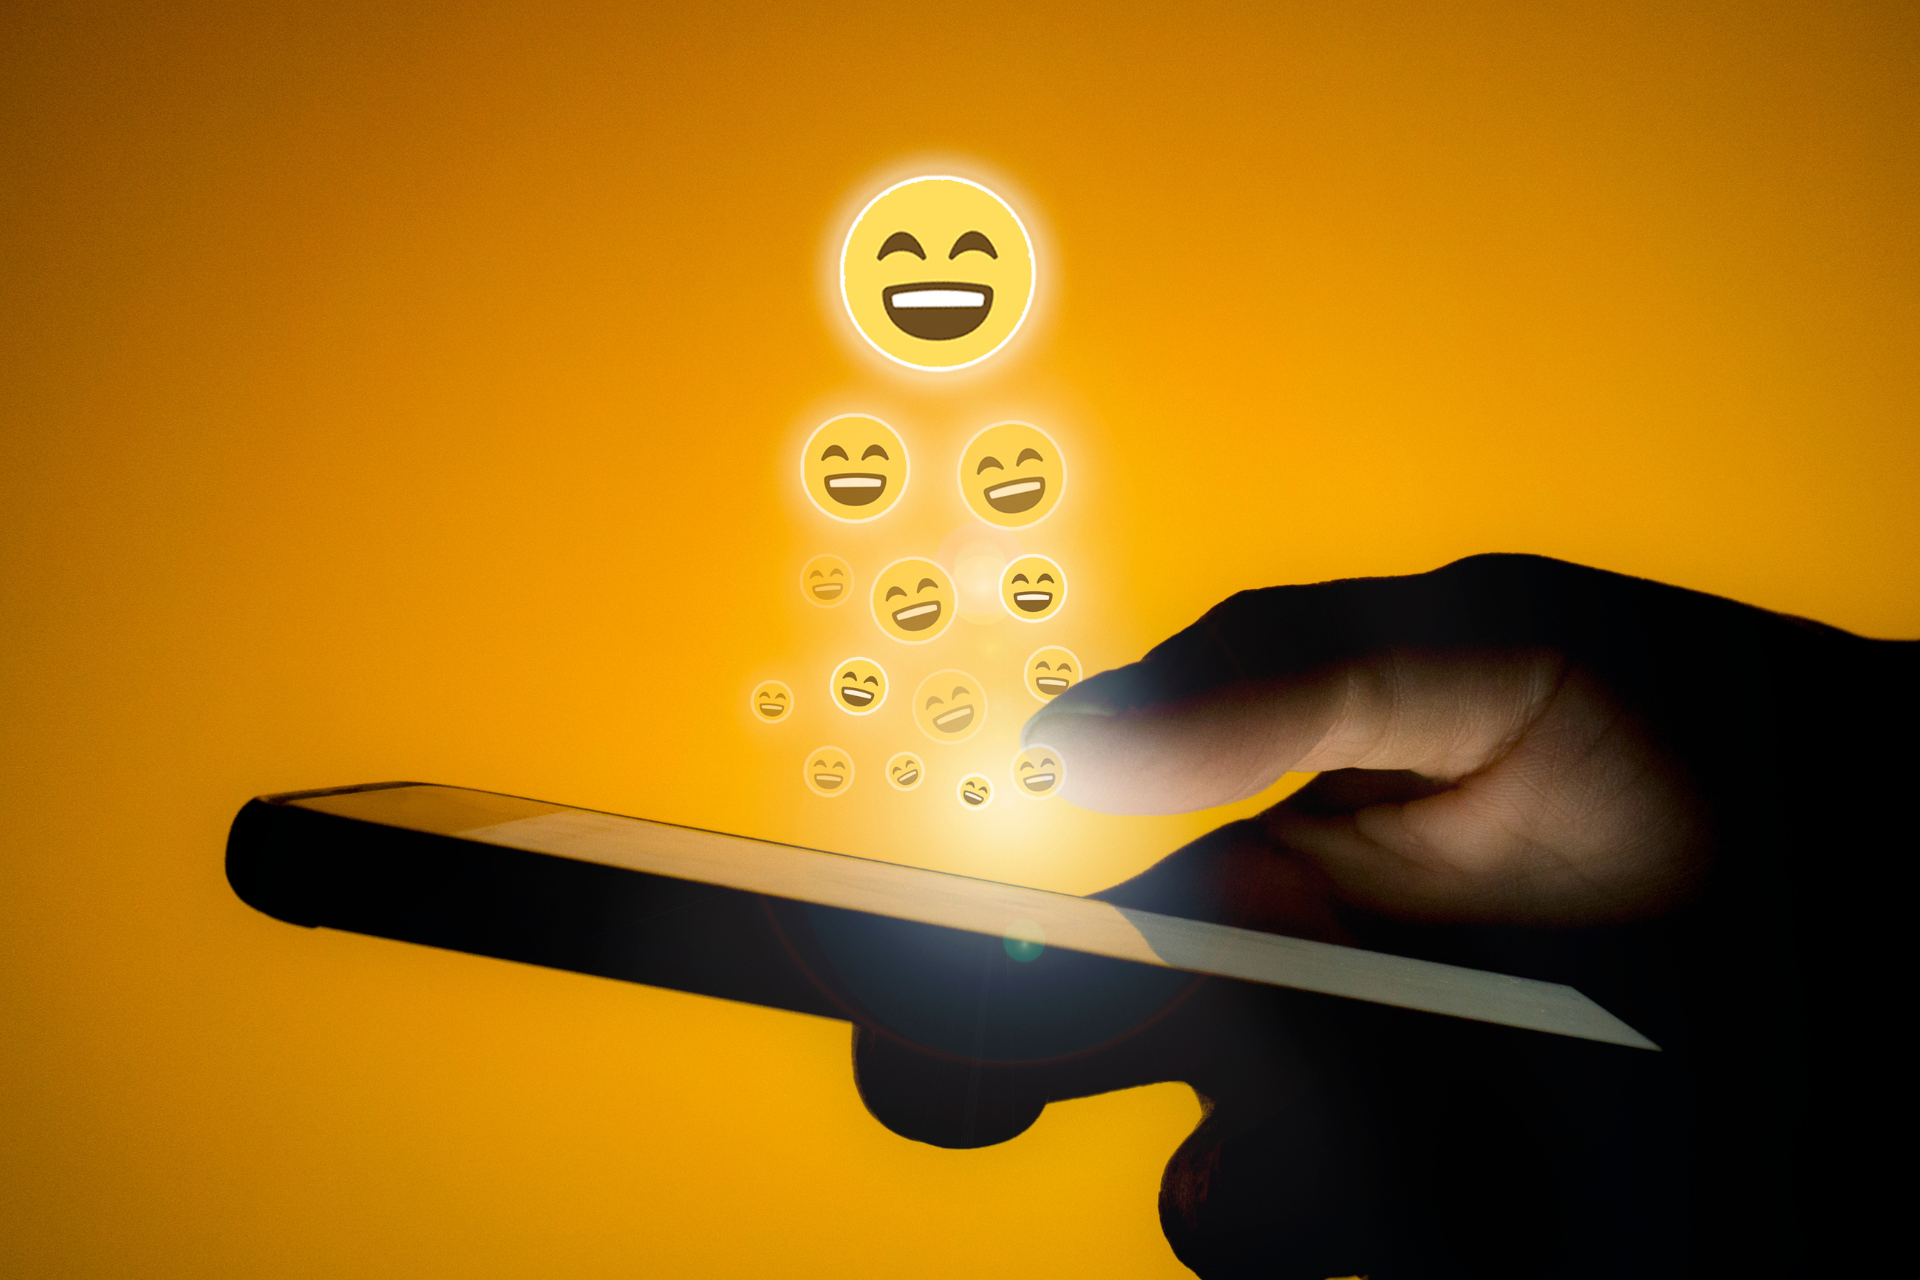 How Emojis in Workplace Communications Can Spark A Lawsuit (Or Make It Harder To Defend One)